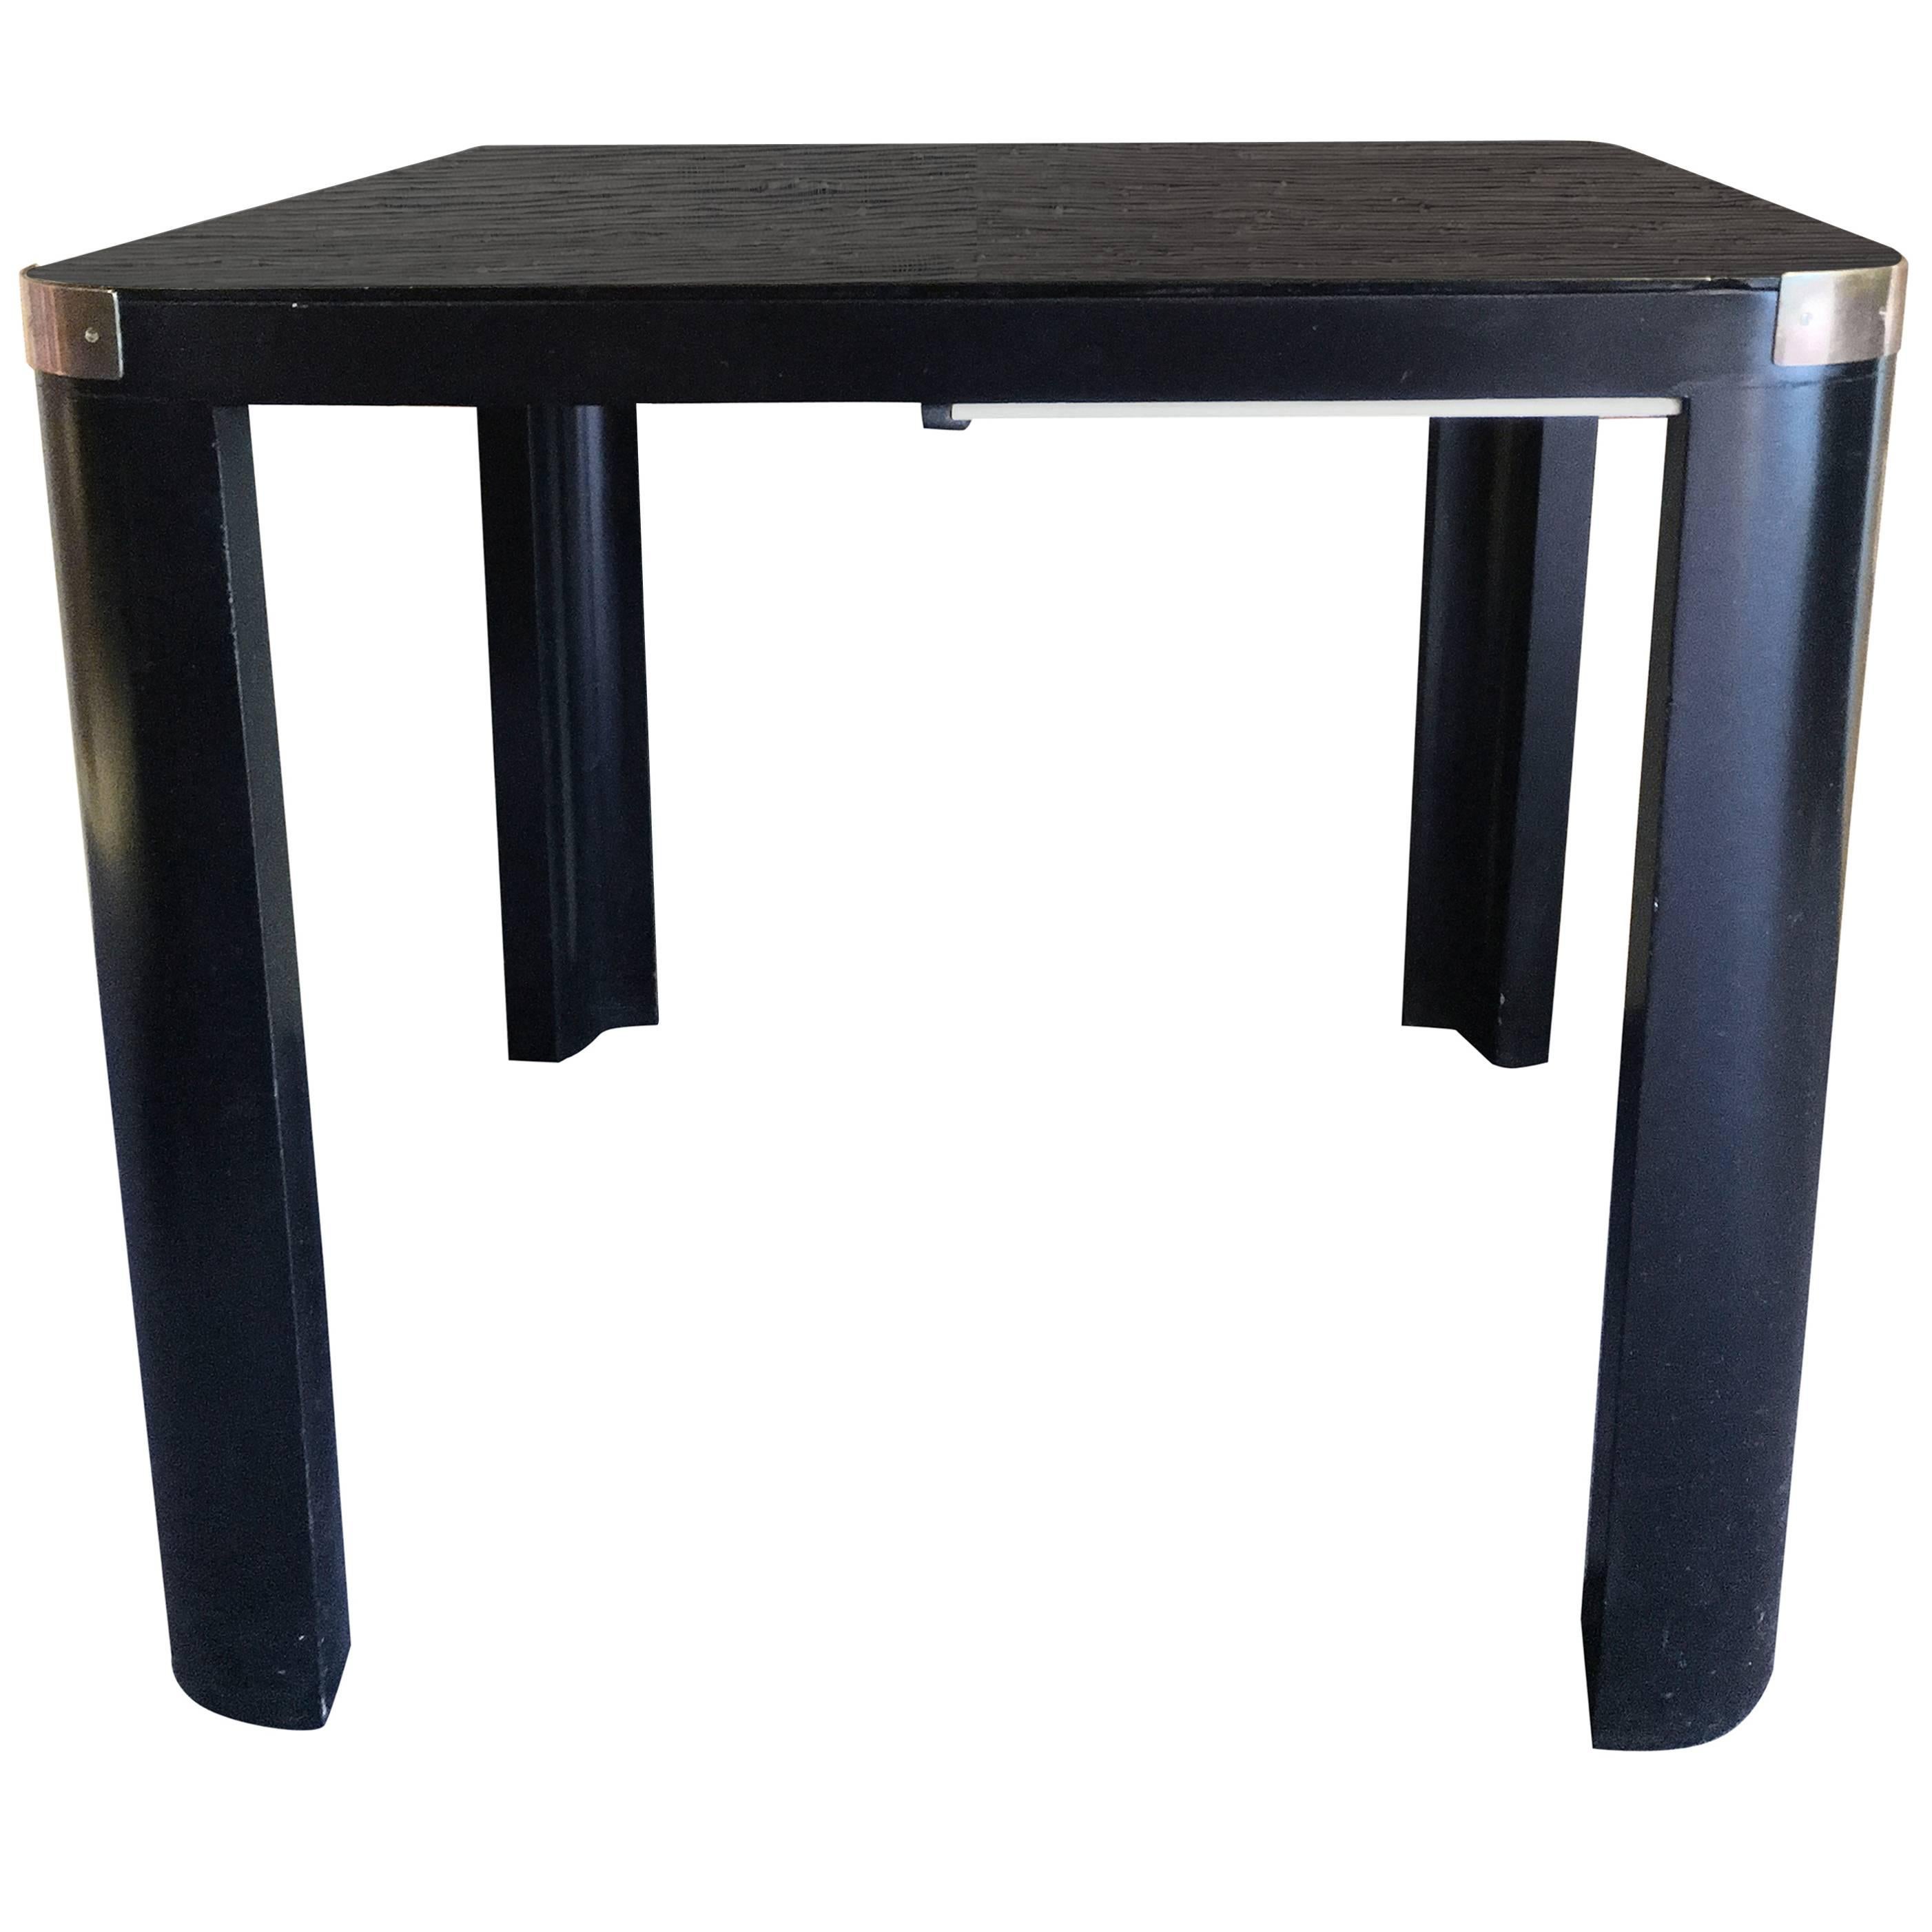 Vintage Art Deco Black Wood Glass Black Coffee Table, 1940, Italy For Sale